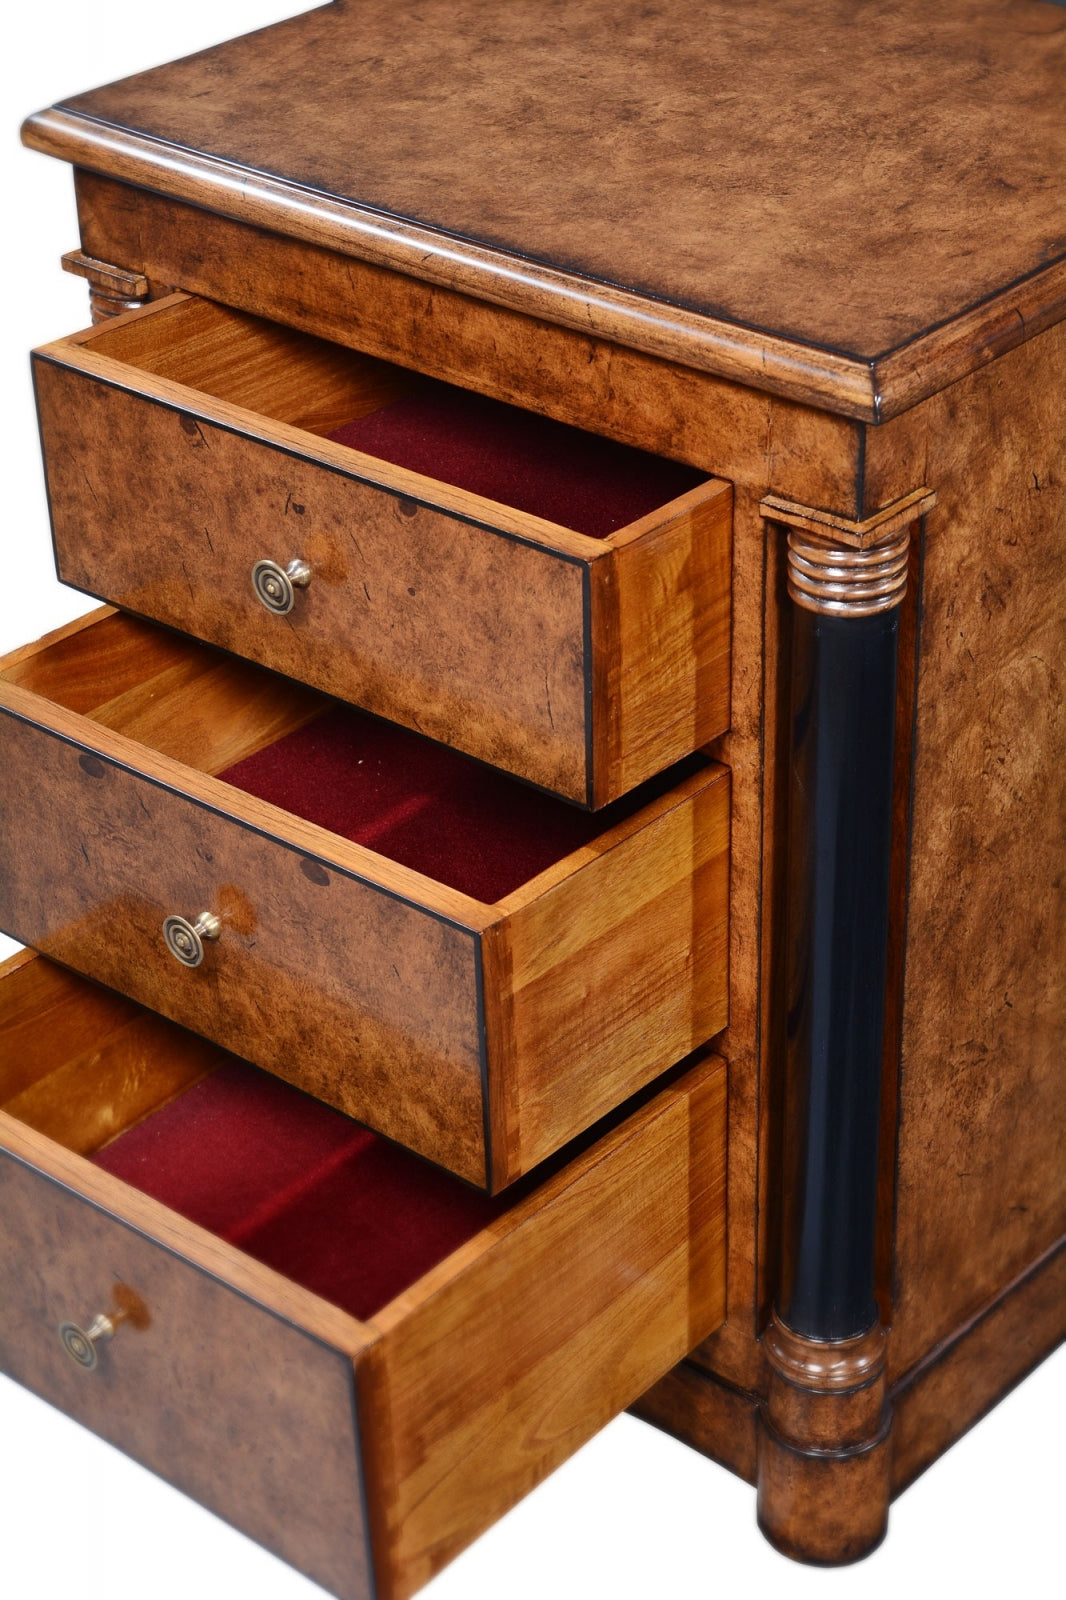 Empire bedside chest of drawers - burr oak with black columns